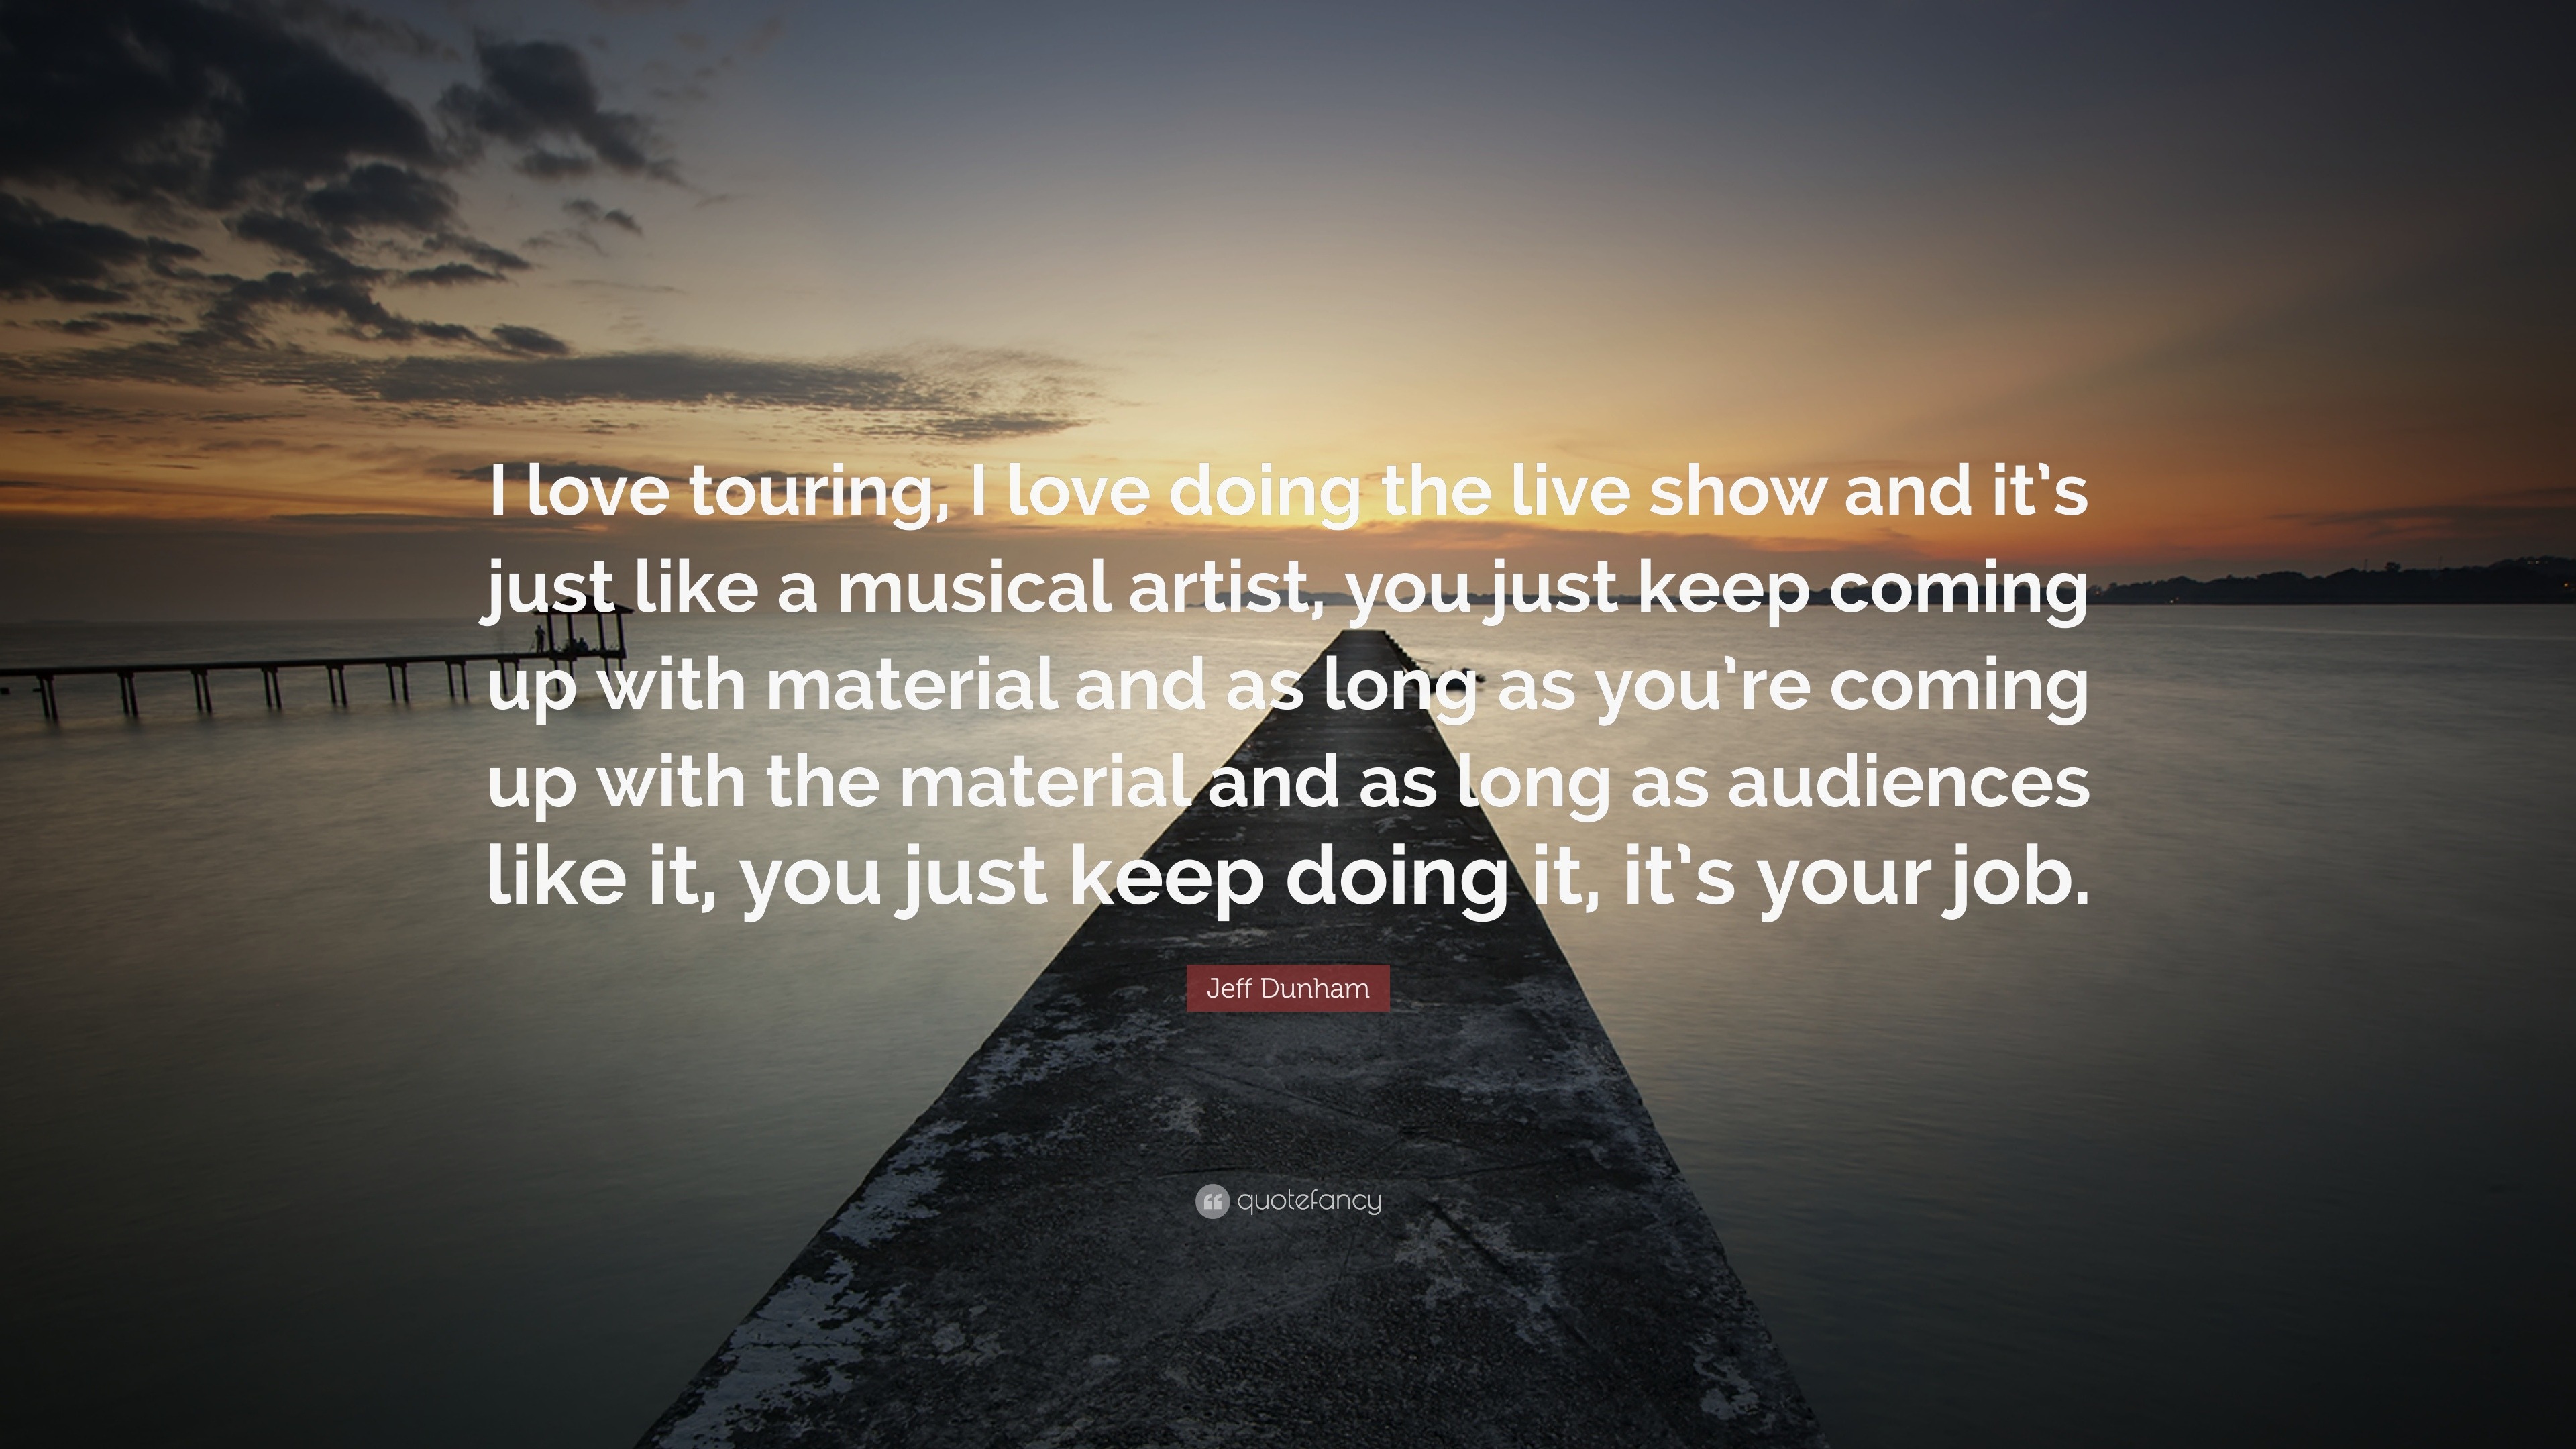 Jeff Dunham Quote “I love touring I love doing the live show and